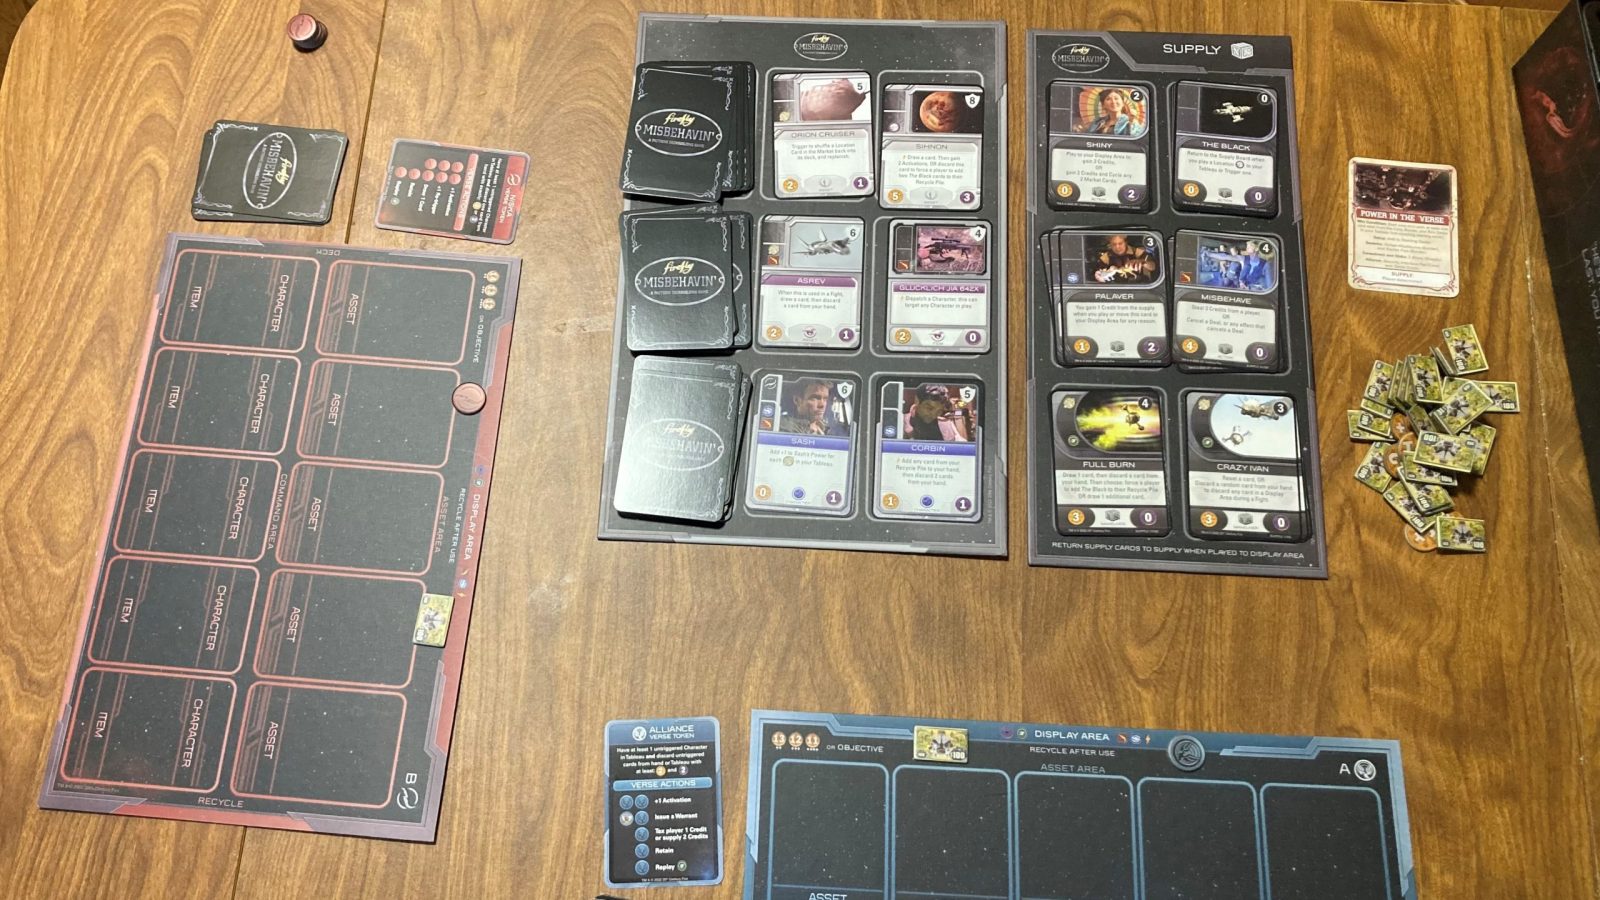 Firefly: Misbehavin' two-player setup with market and supply cards